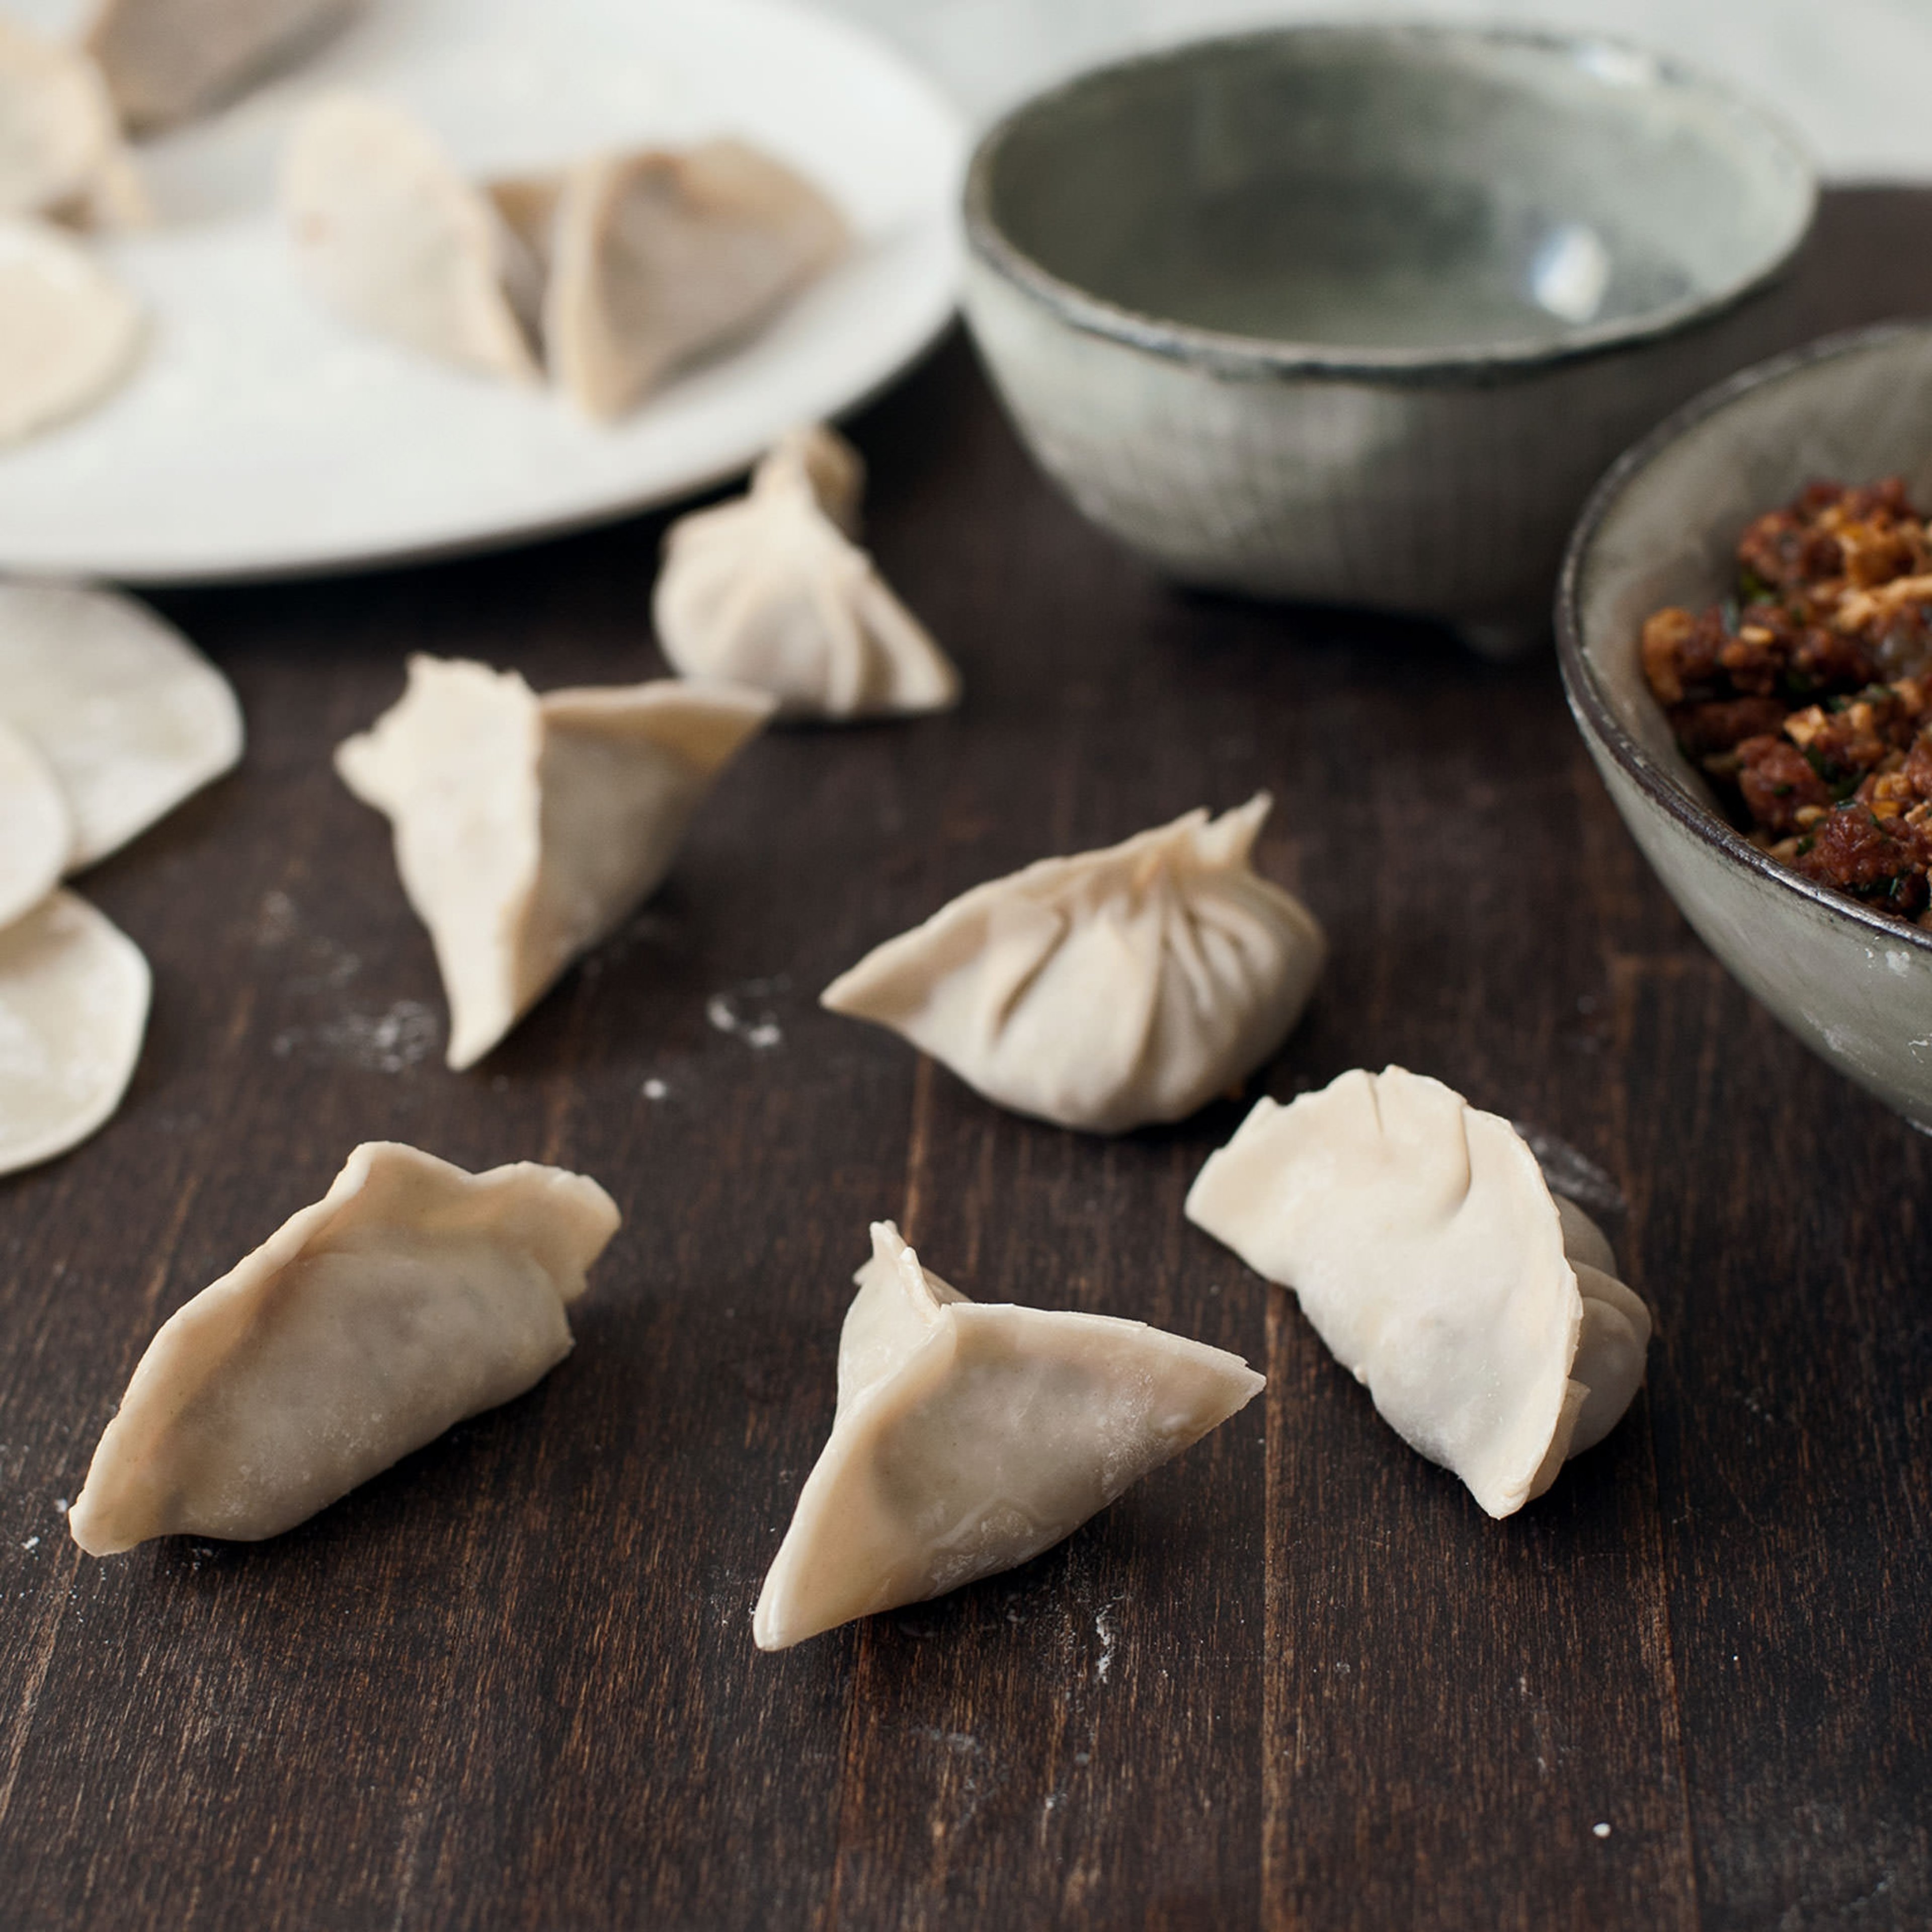 How to Fold Chinese Dumplings